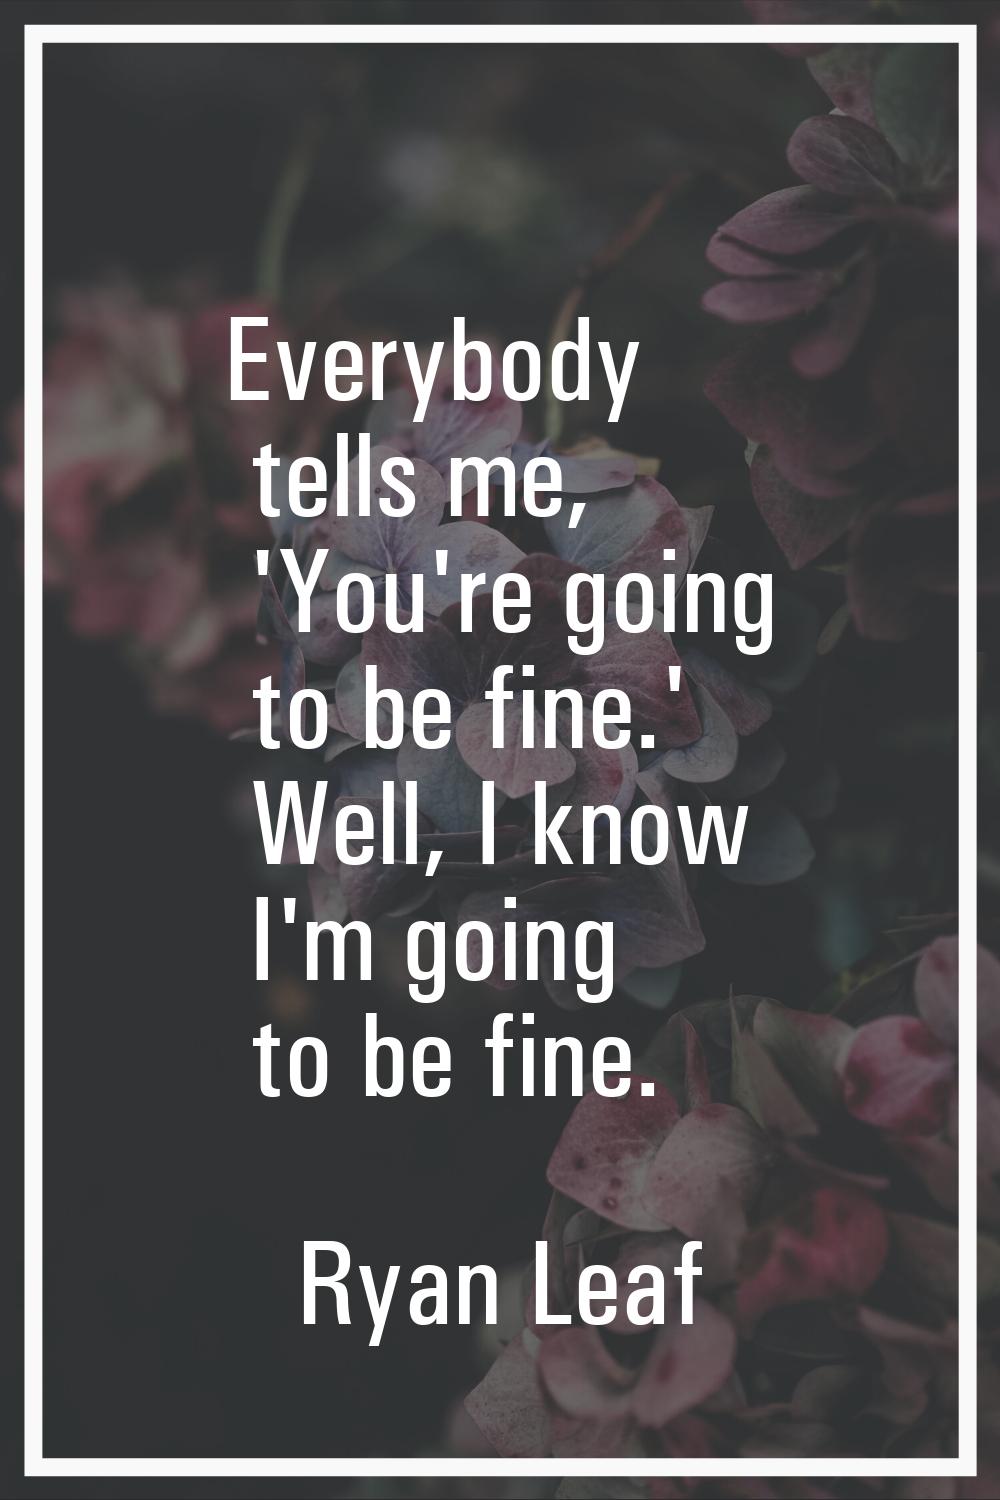 Everybody tells me, 'You're going to be fine.' Well, I know I'm going to be fine.